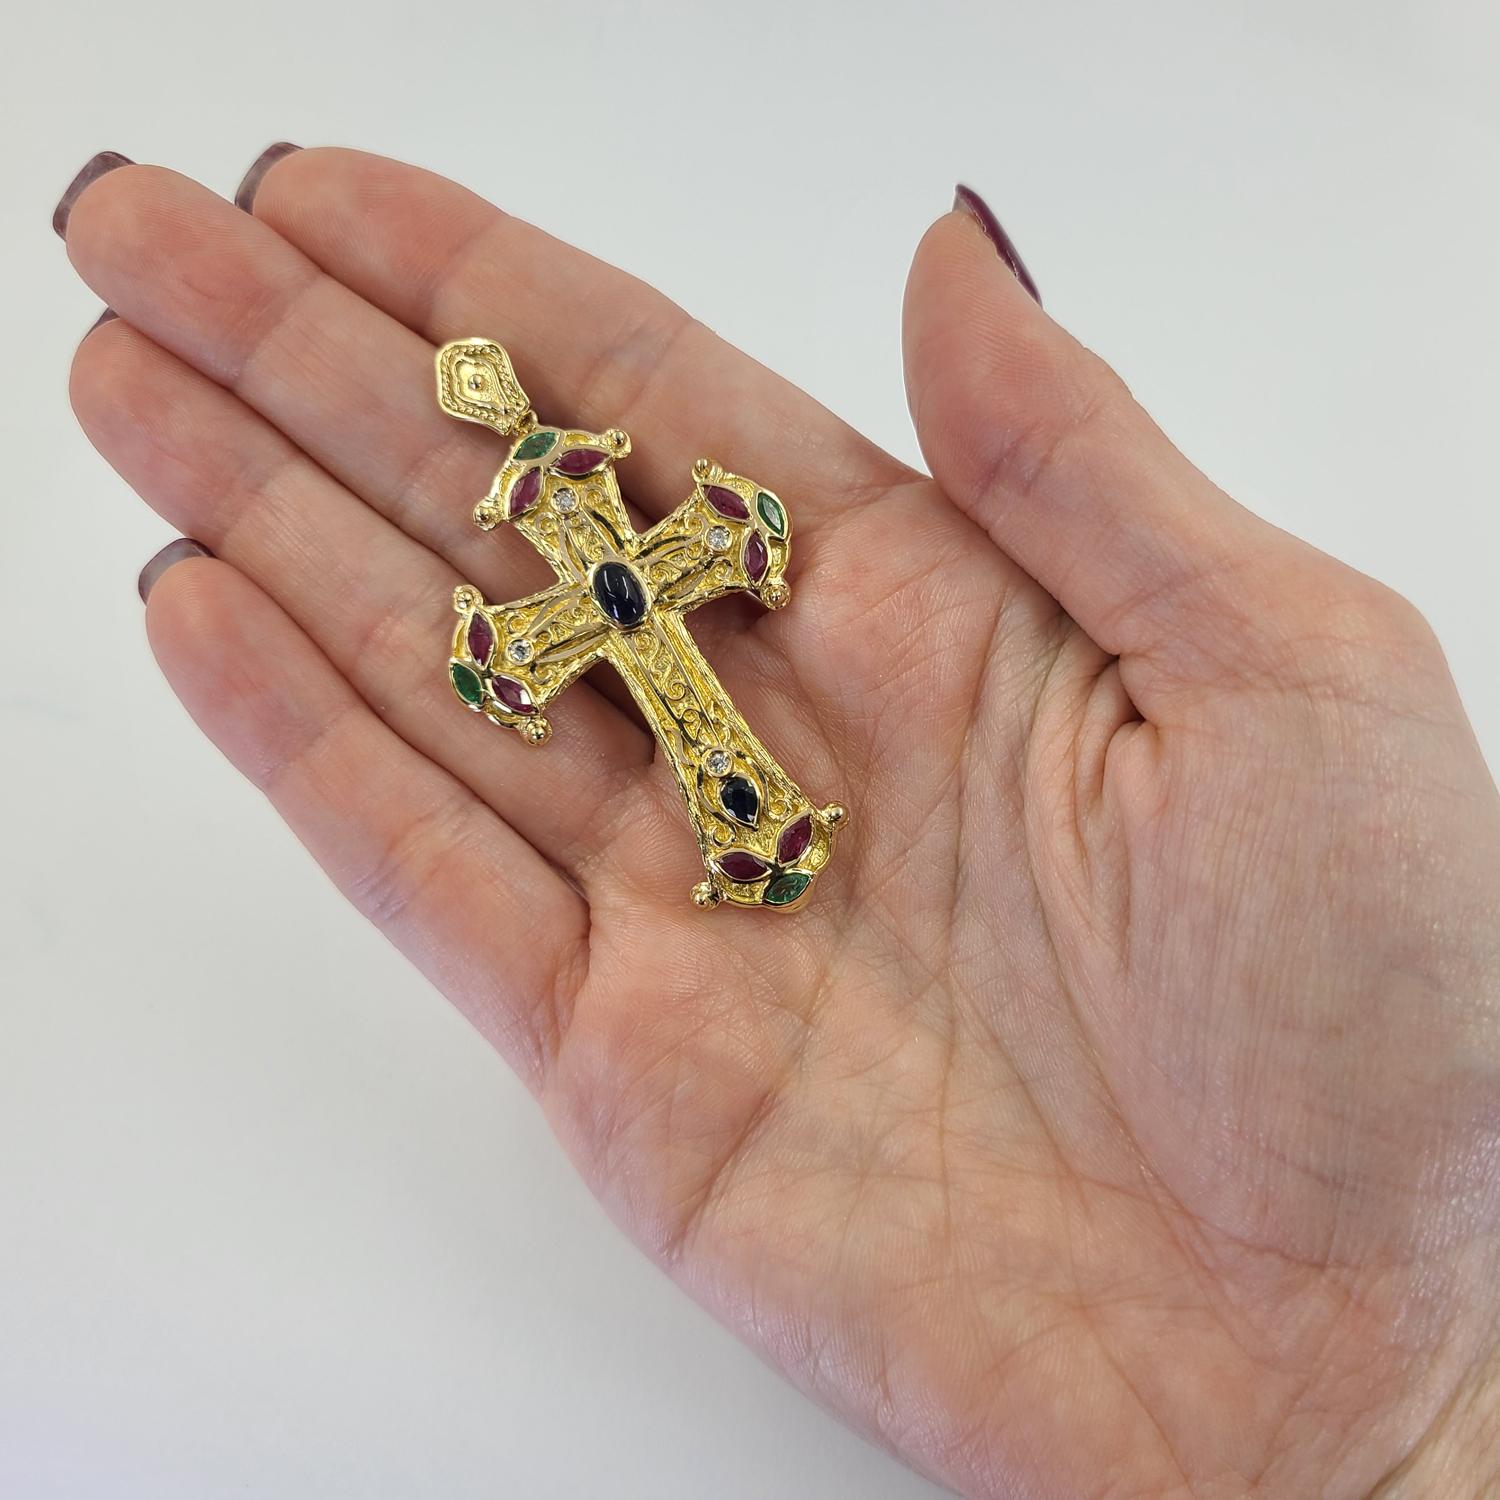 18 Karat Yellow Gold Gemstone Cross Pendant Featuring 8 Marquise Rubies, 4 Round Diamonds, 4 Marquise Emeralds, & 2 Sapphires Totaling Approximately 1.00 Carat. Textured Design with Contrasting Finish. 2.5 Inches Long. Finished Weight Is 10.0 Grams.